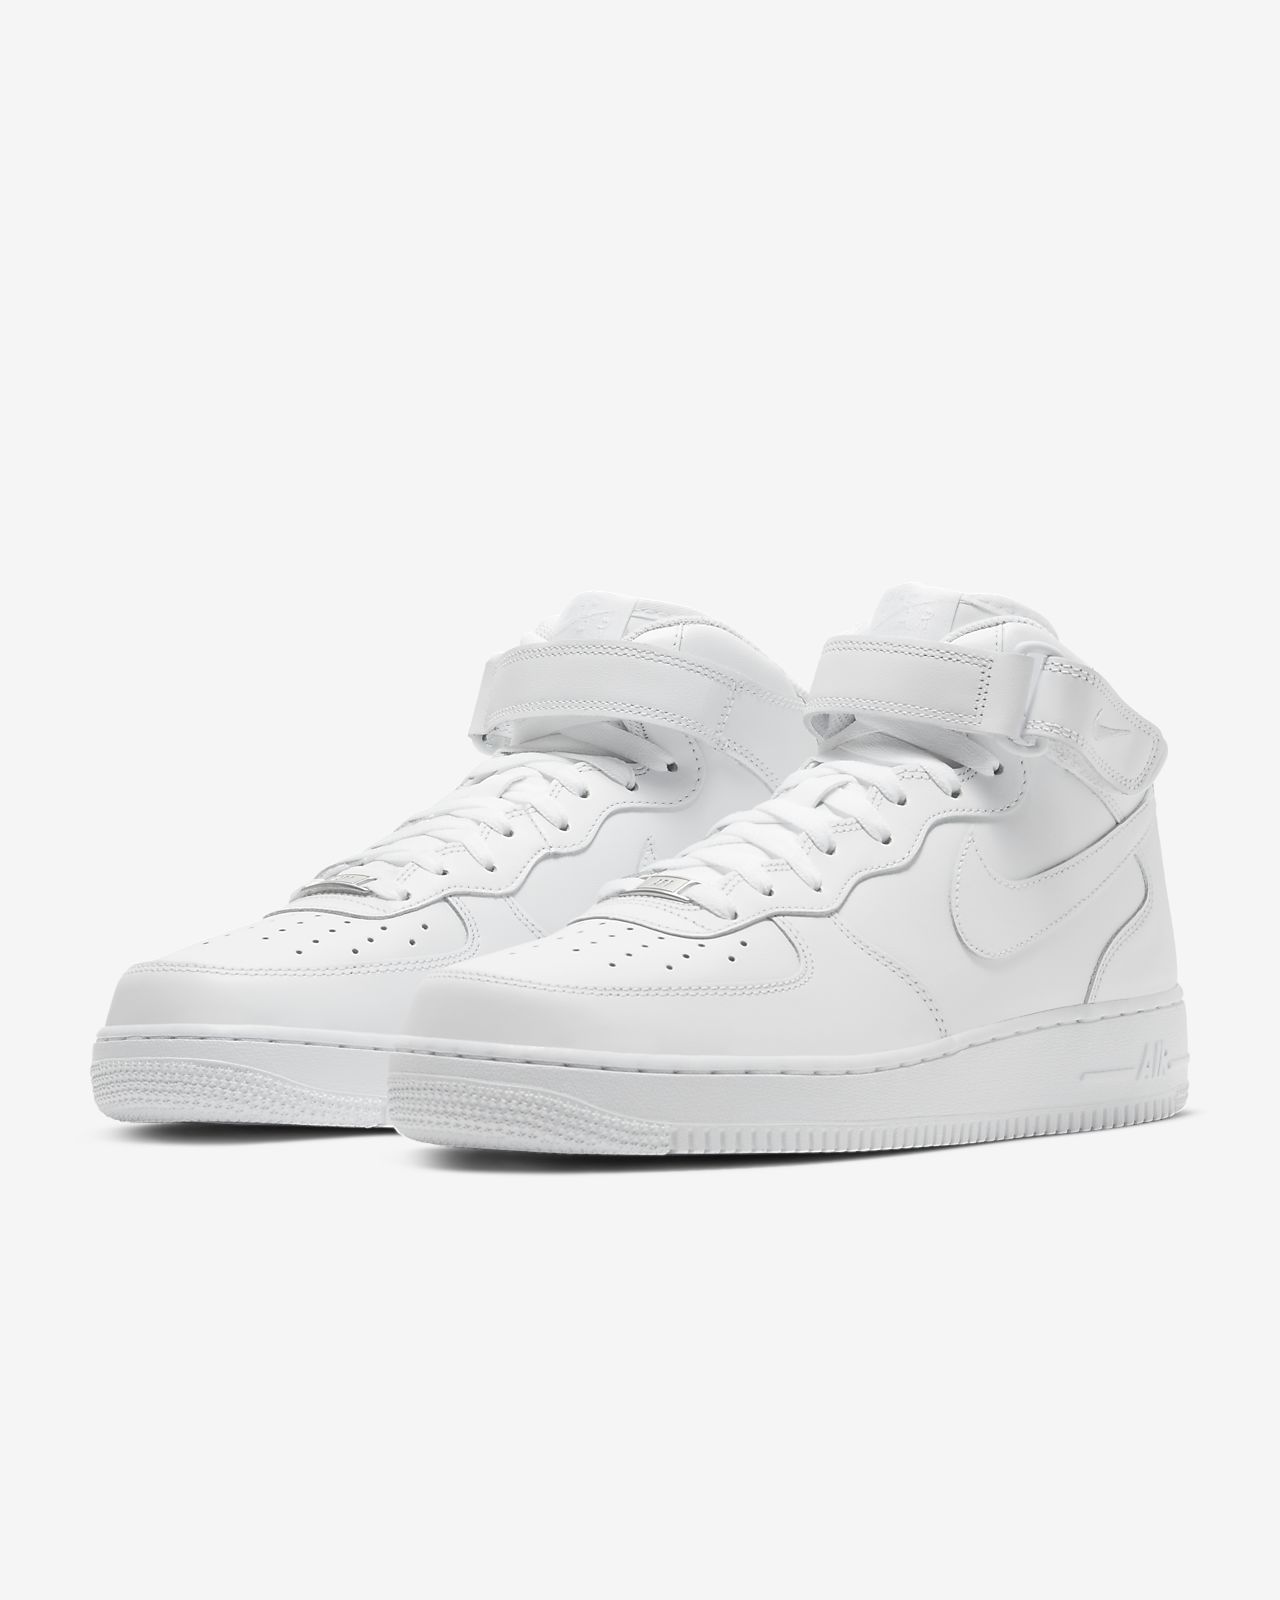 nike air force 1 mid hombre 2016